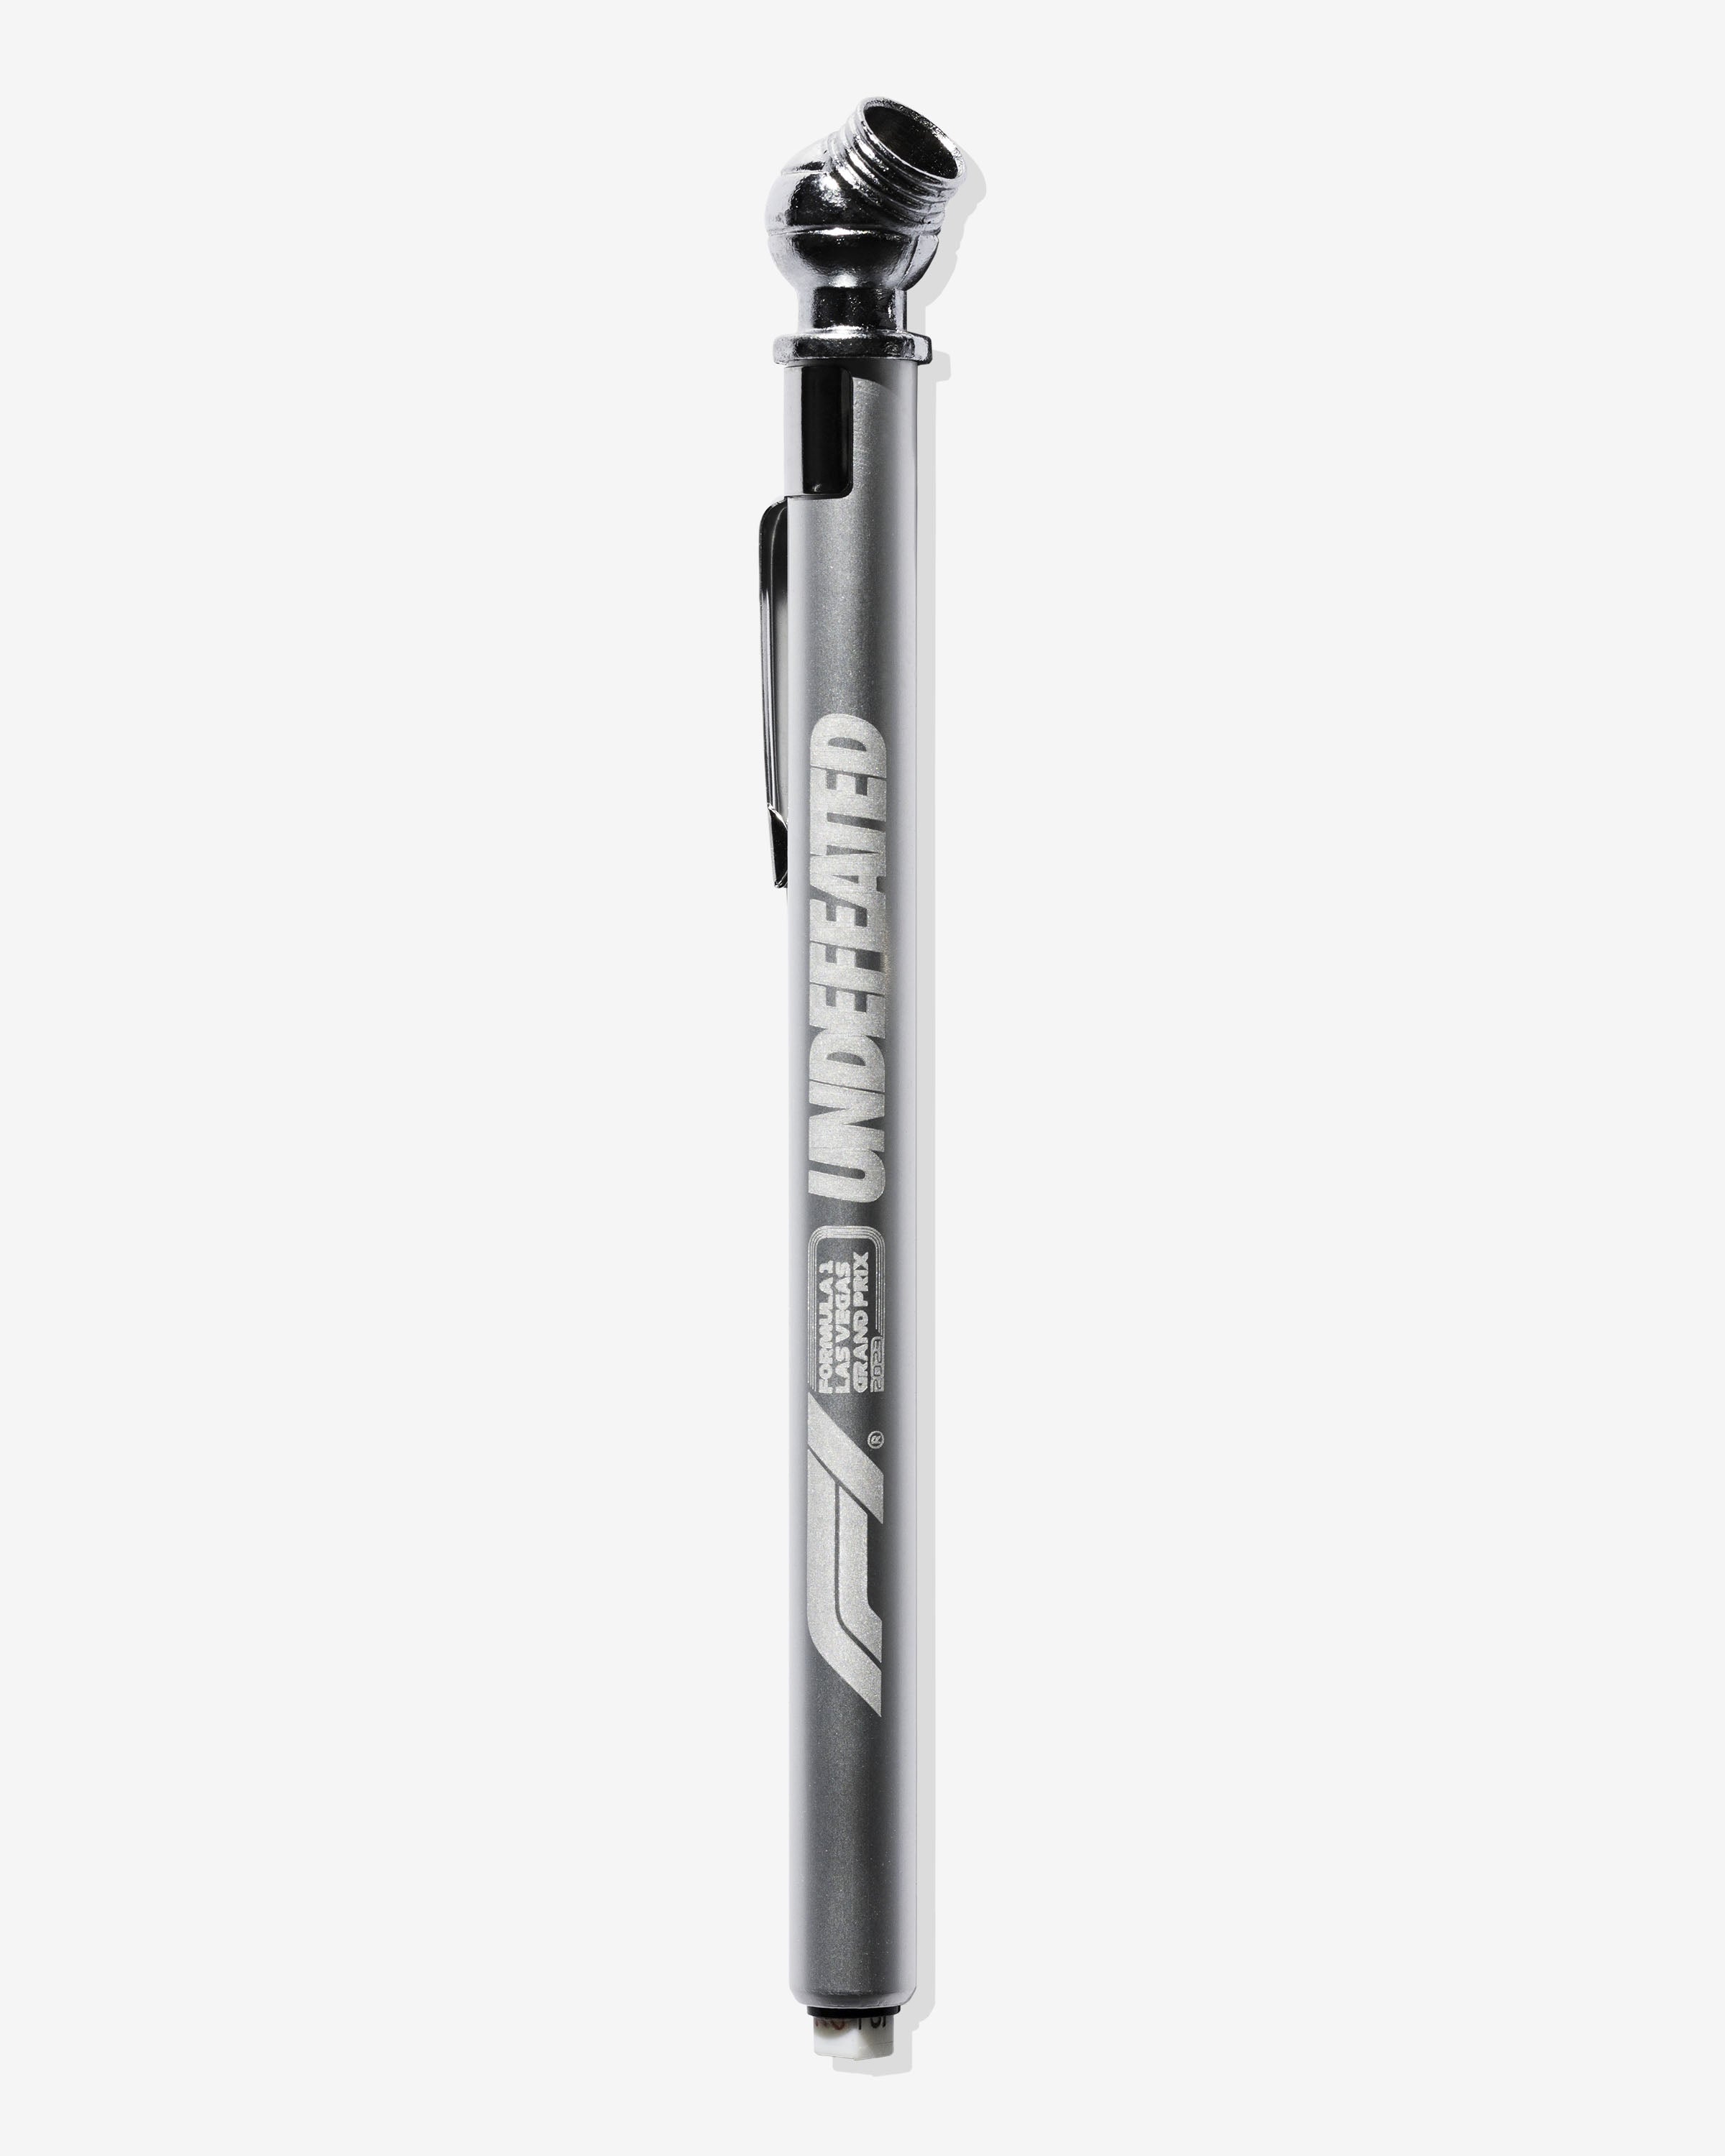 UNDEFEATED X F1 LVGP TIRE GAUGE - SILVER